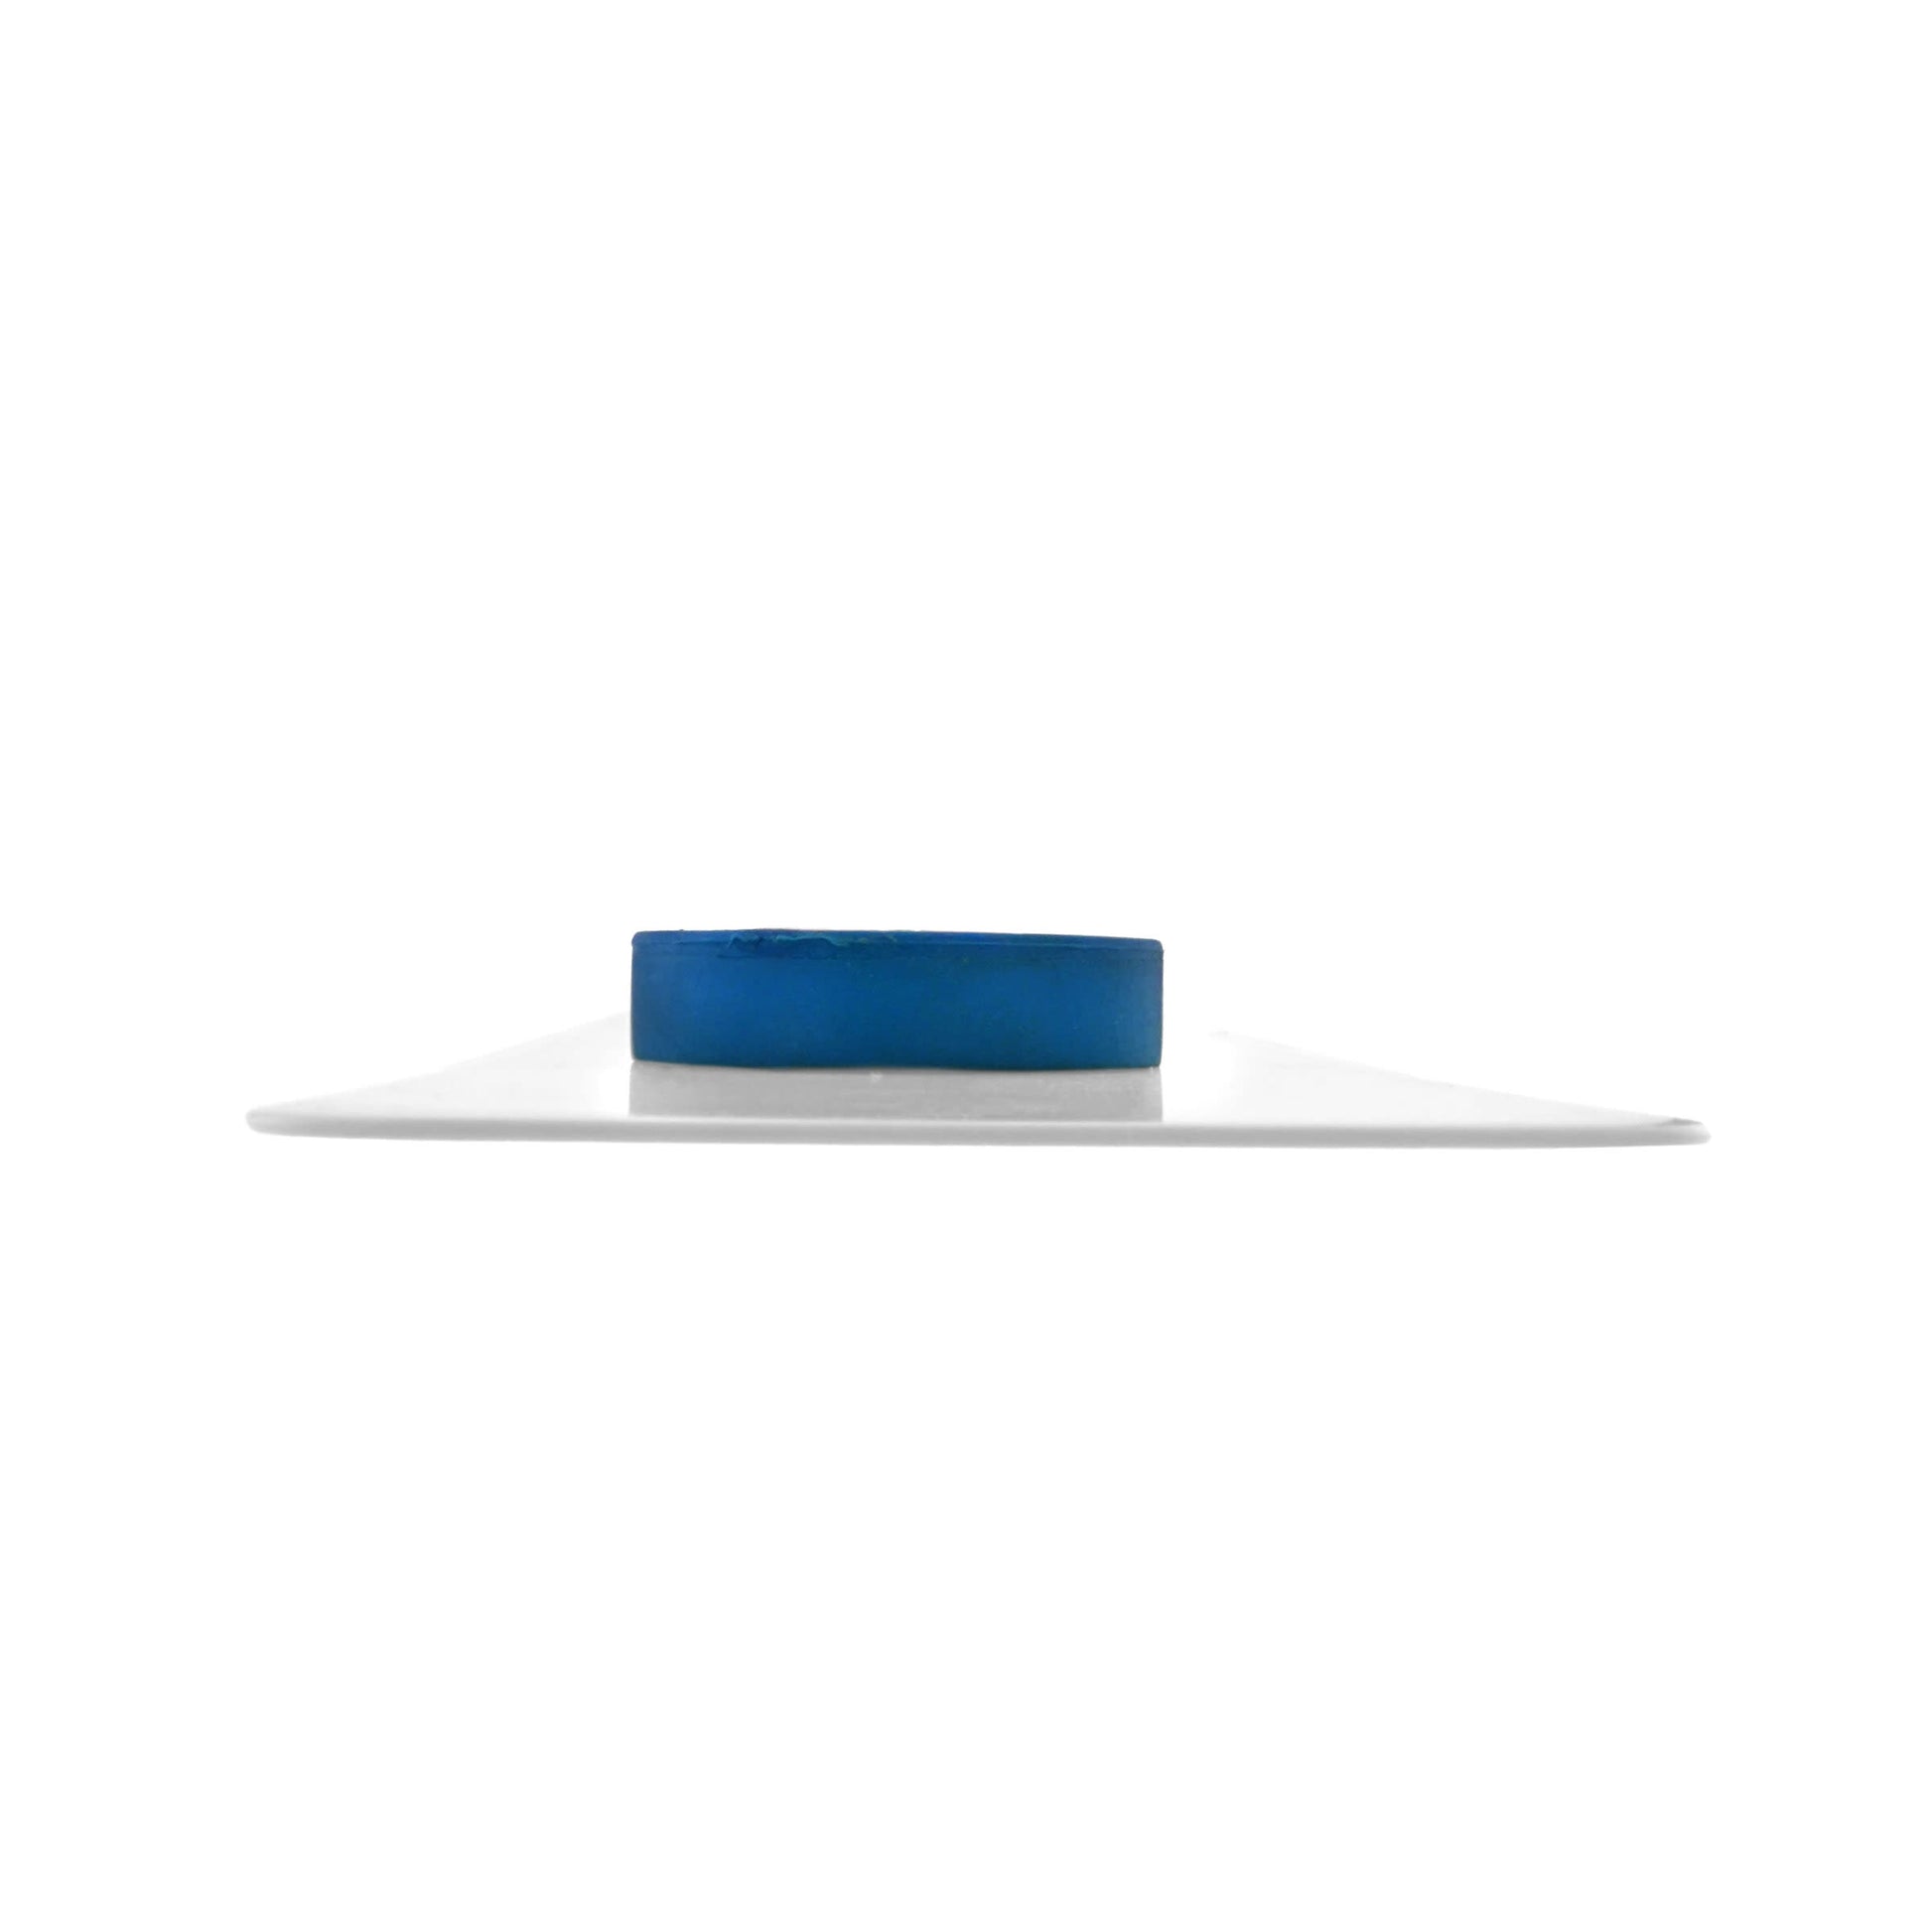 Load image into Gallery viewer, 08046 Magnetic Bulletin Bar - White - Packaging